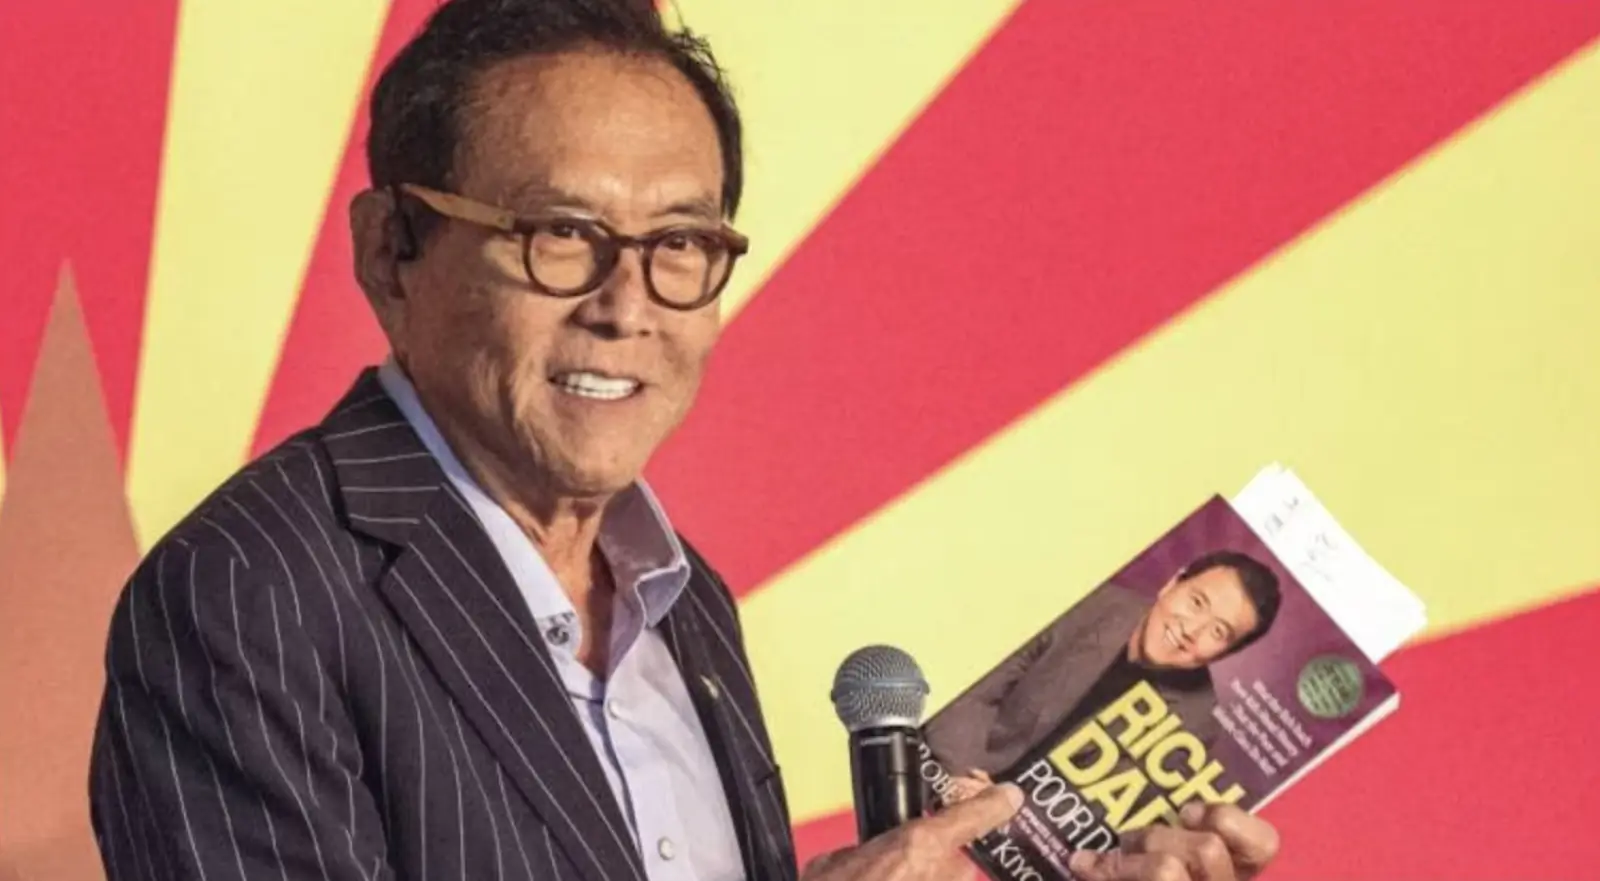 Kiyosaki, author of the book 'Rich Dad, Poor Dad', told the way to make money from debt, said - debt is the real money